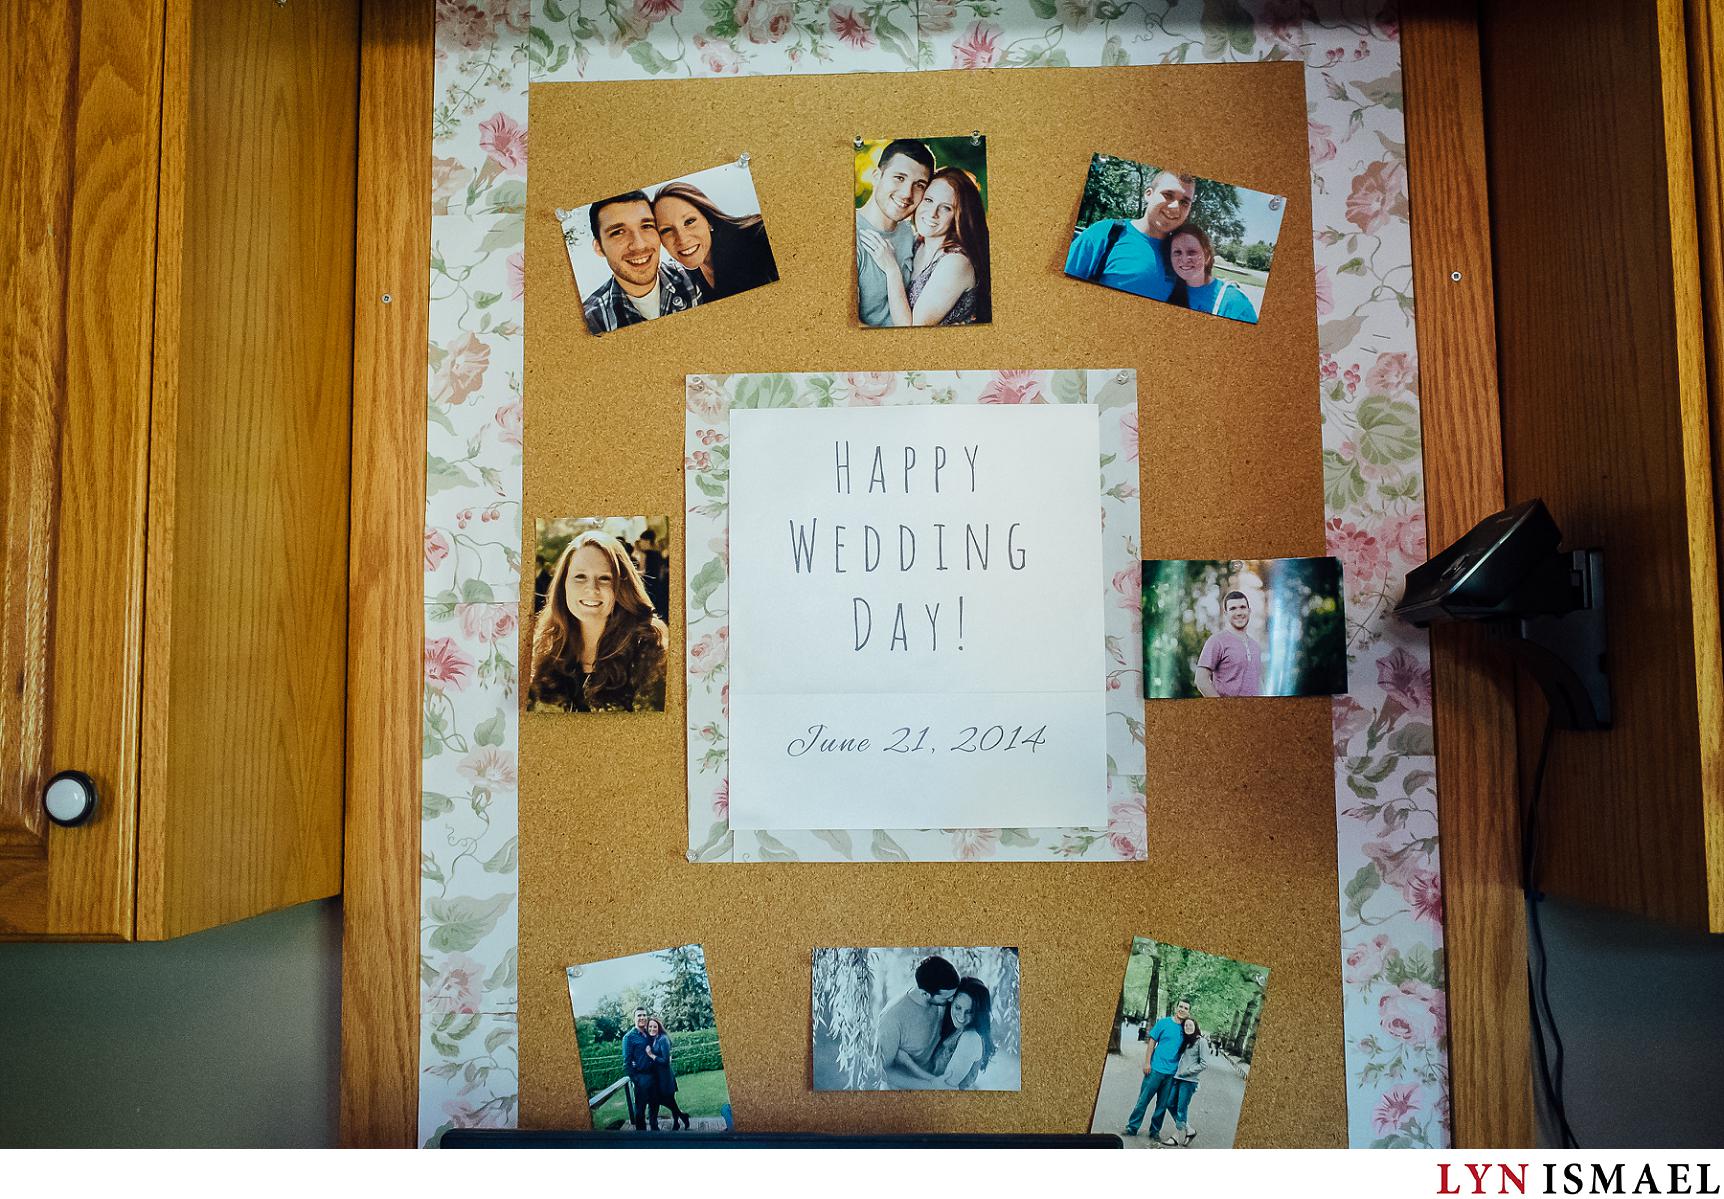 Engagement photos of the bride and groom displayed at the kitchen pin board